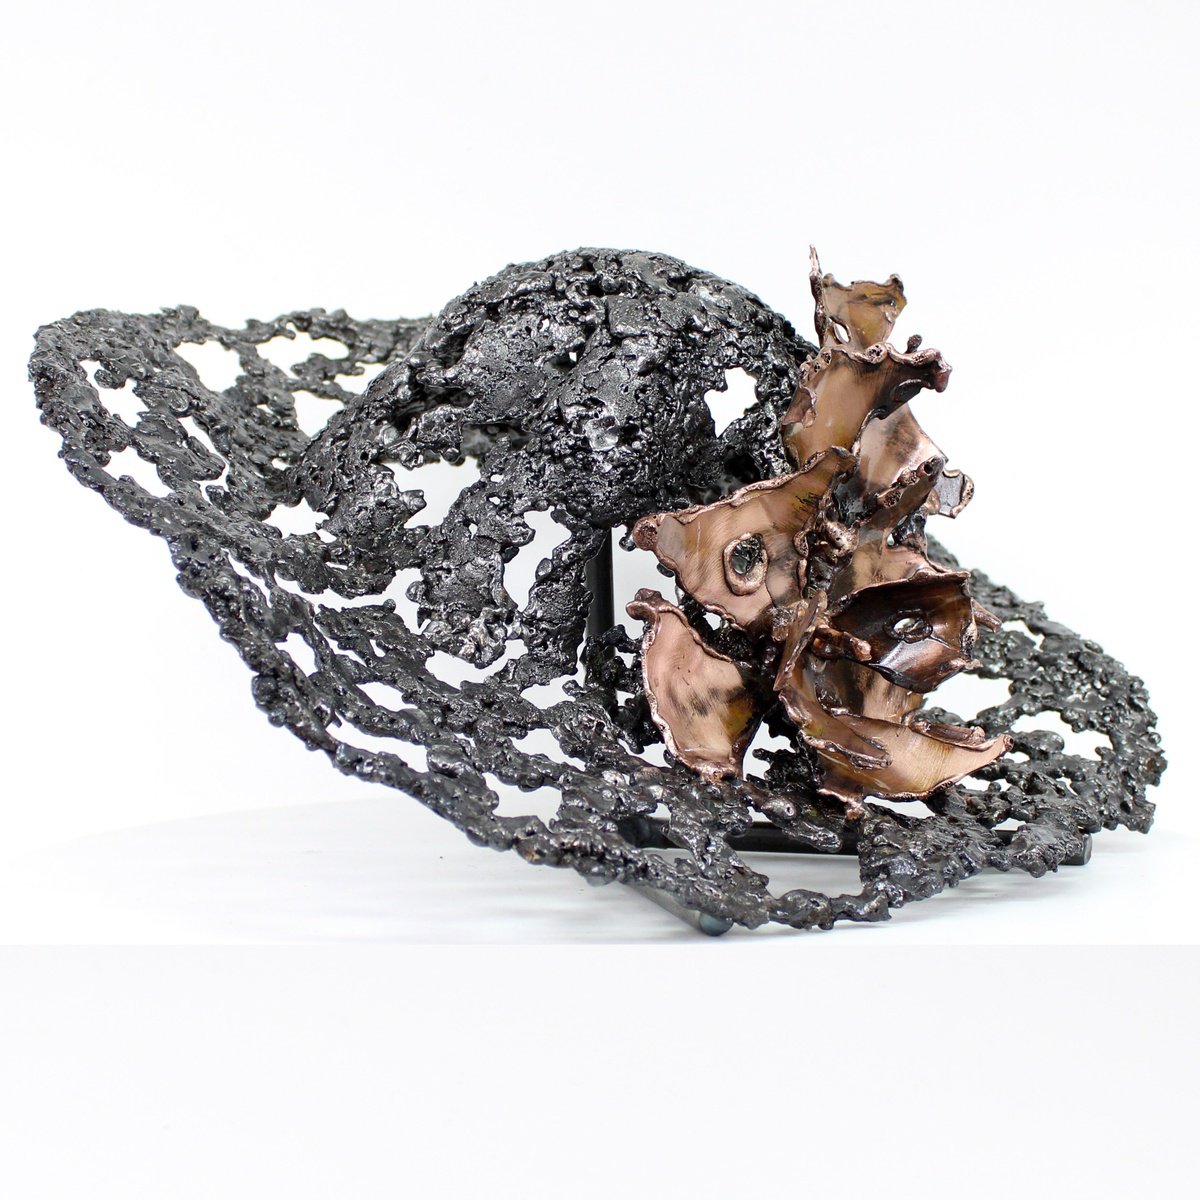 Hat sculpture - Cap artwork in bronze and steel lace by Philippe Buil